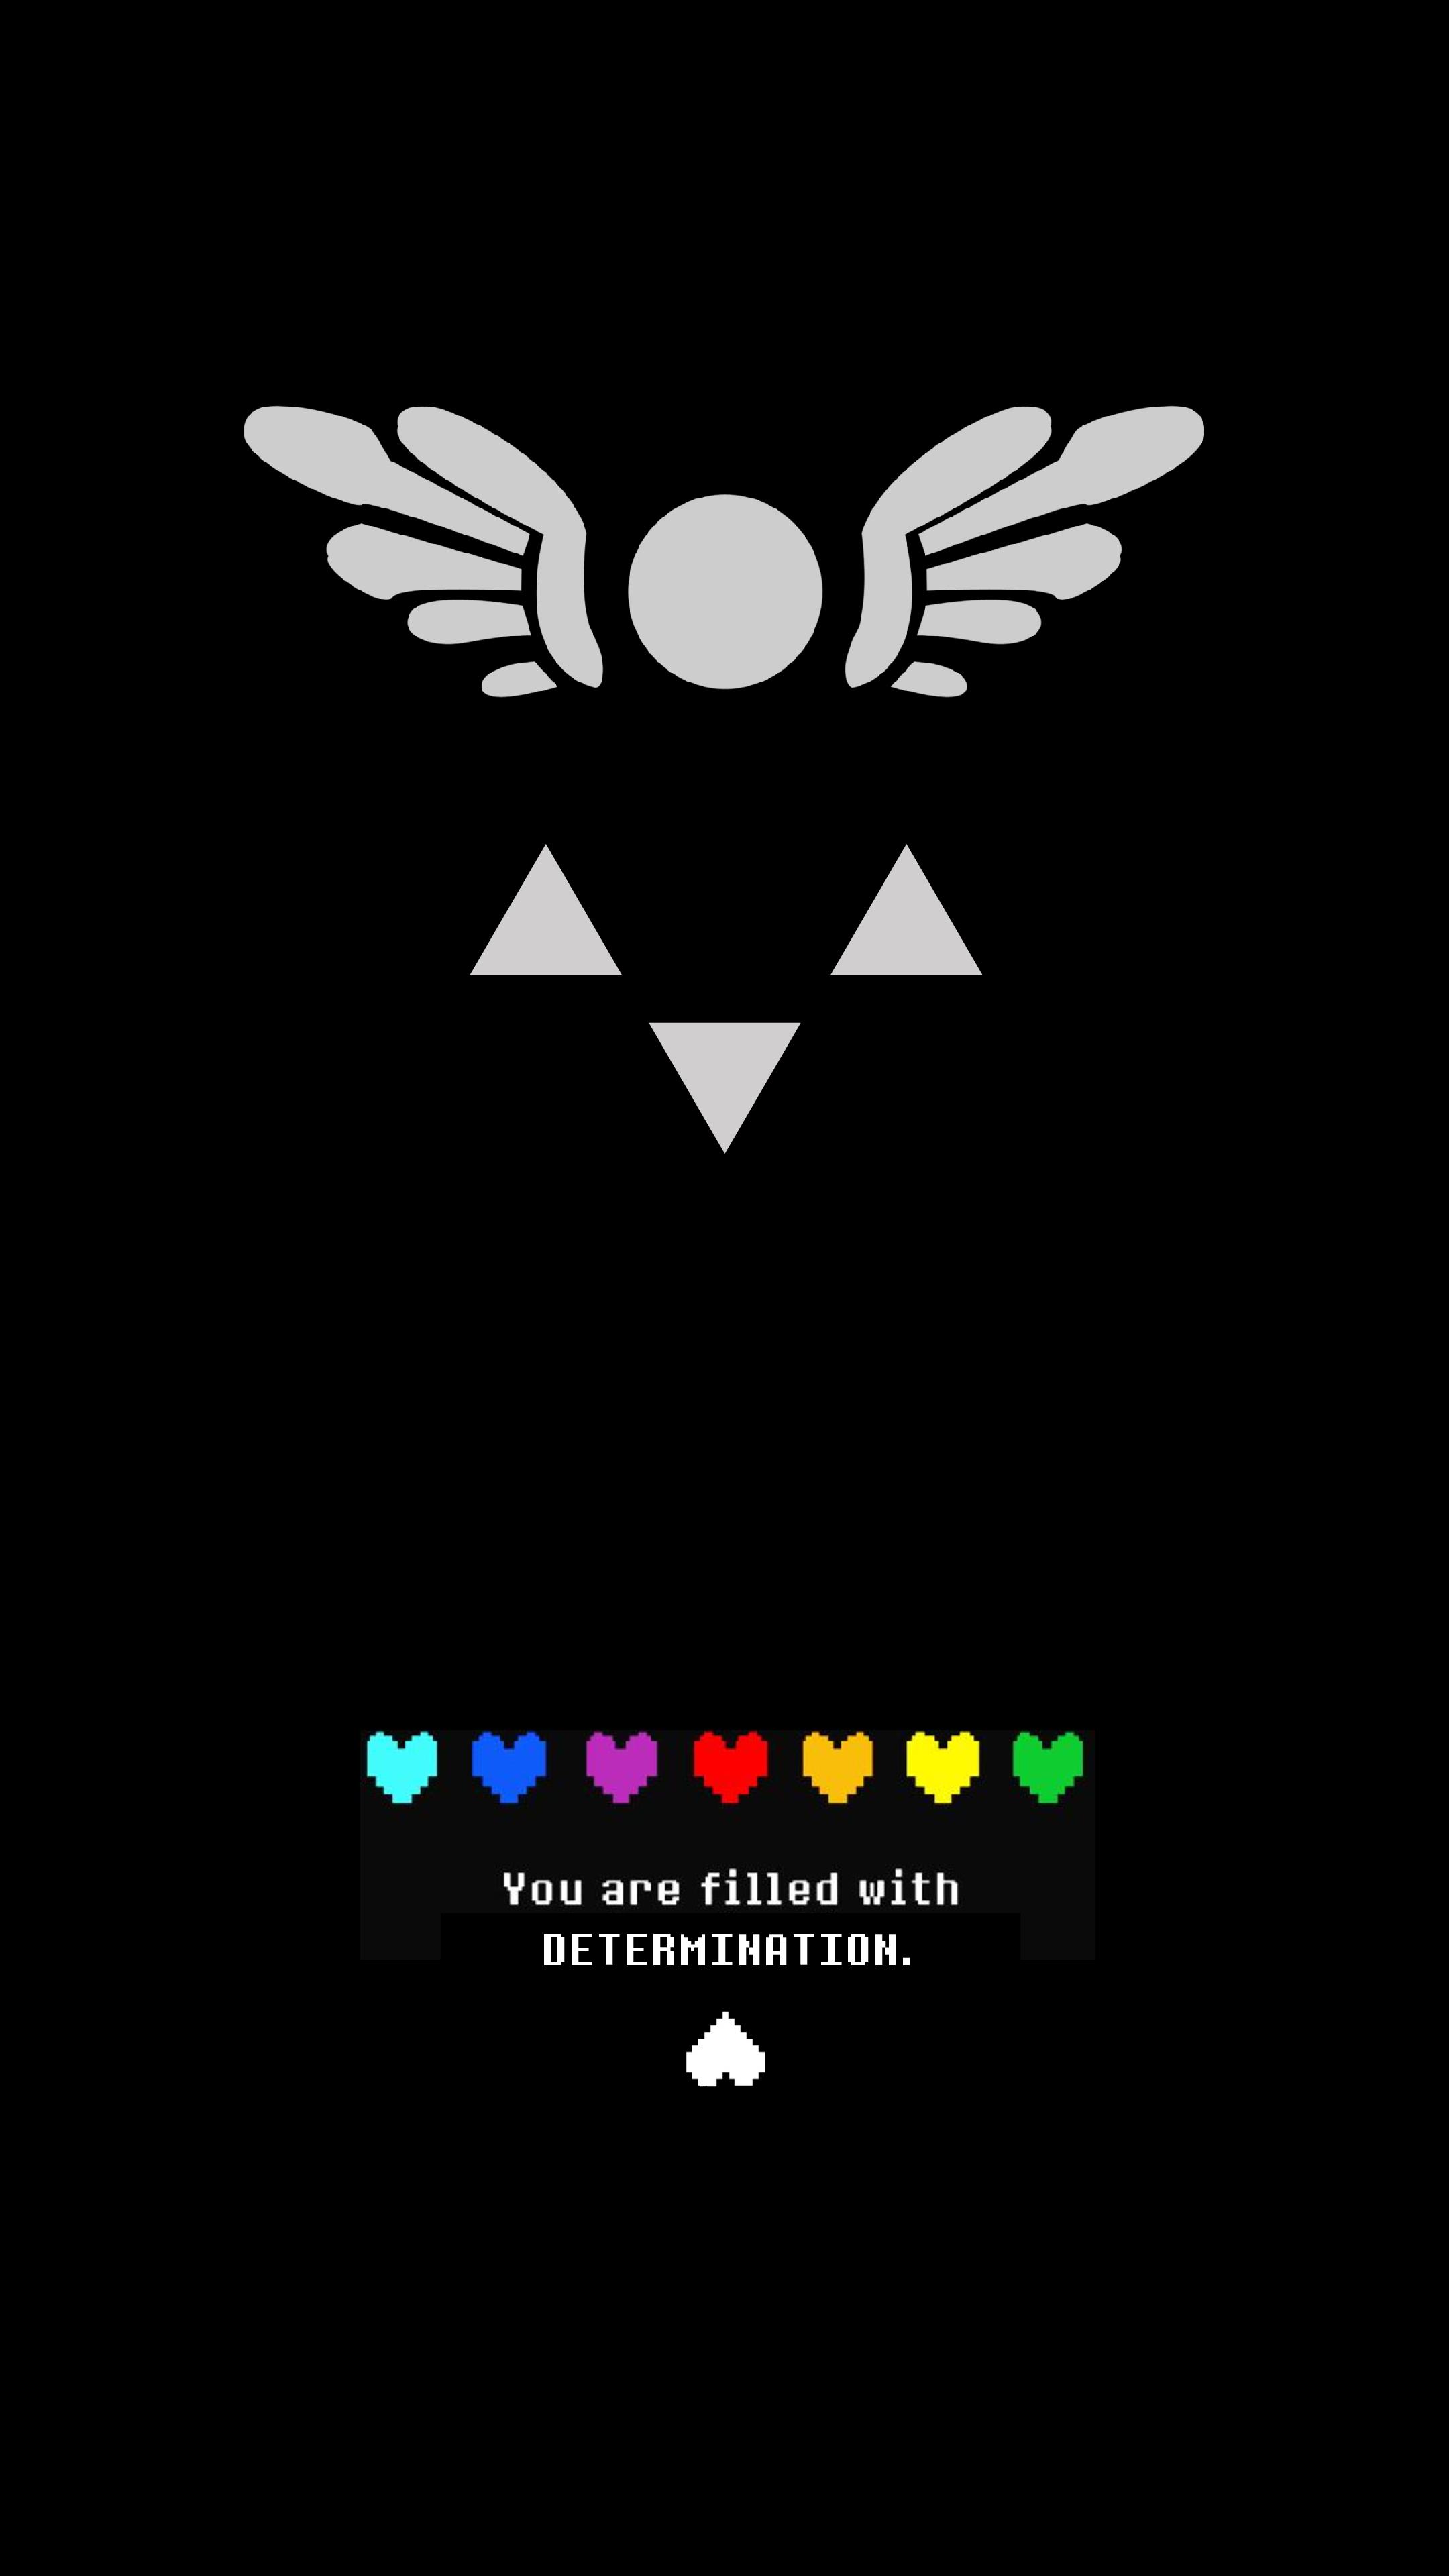 I made an undertale wallpaper because I couldn't find one that I